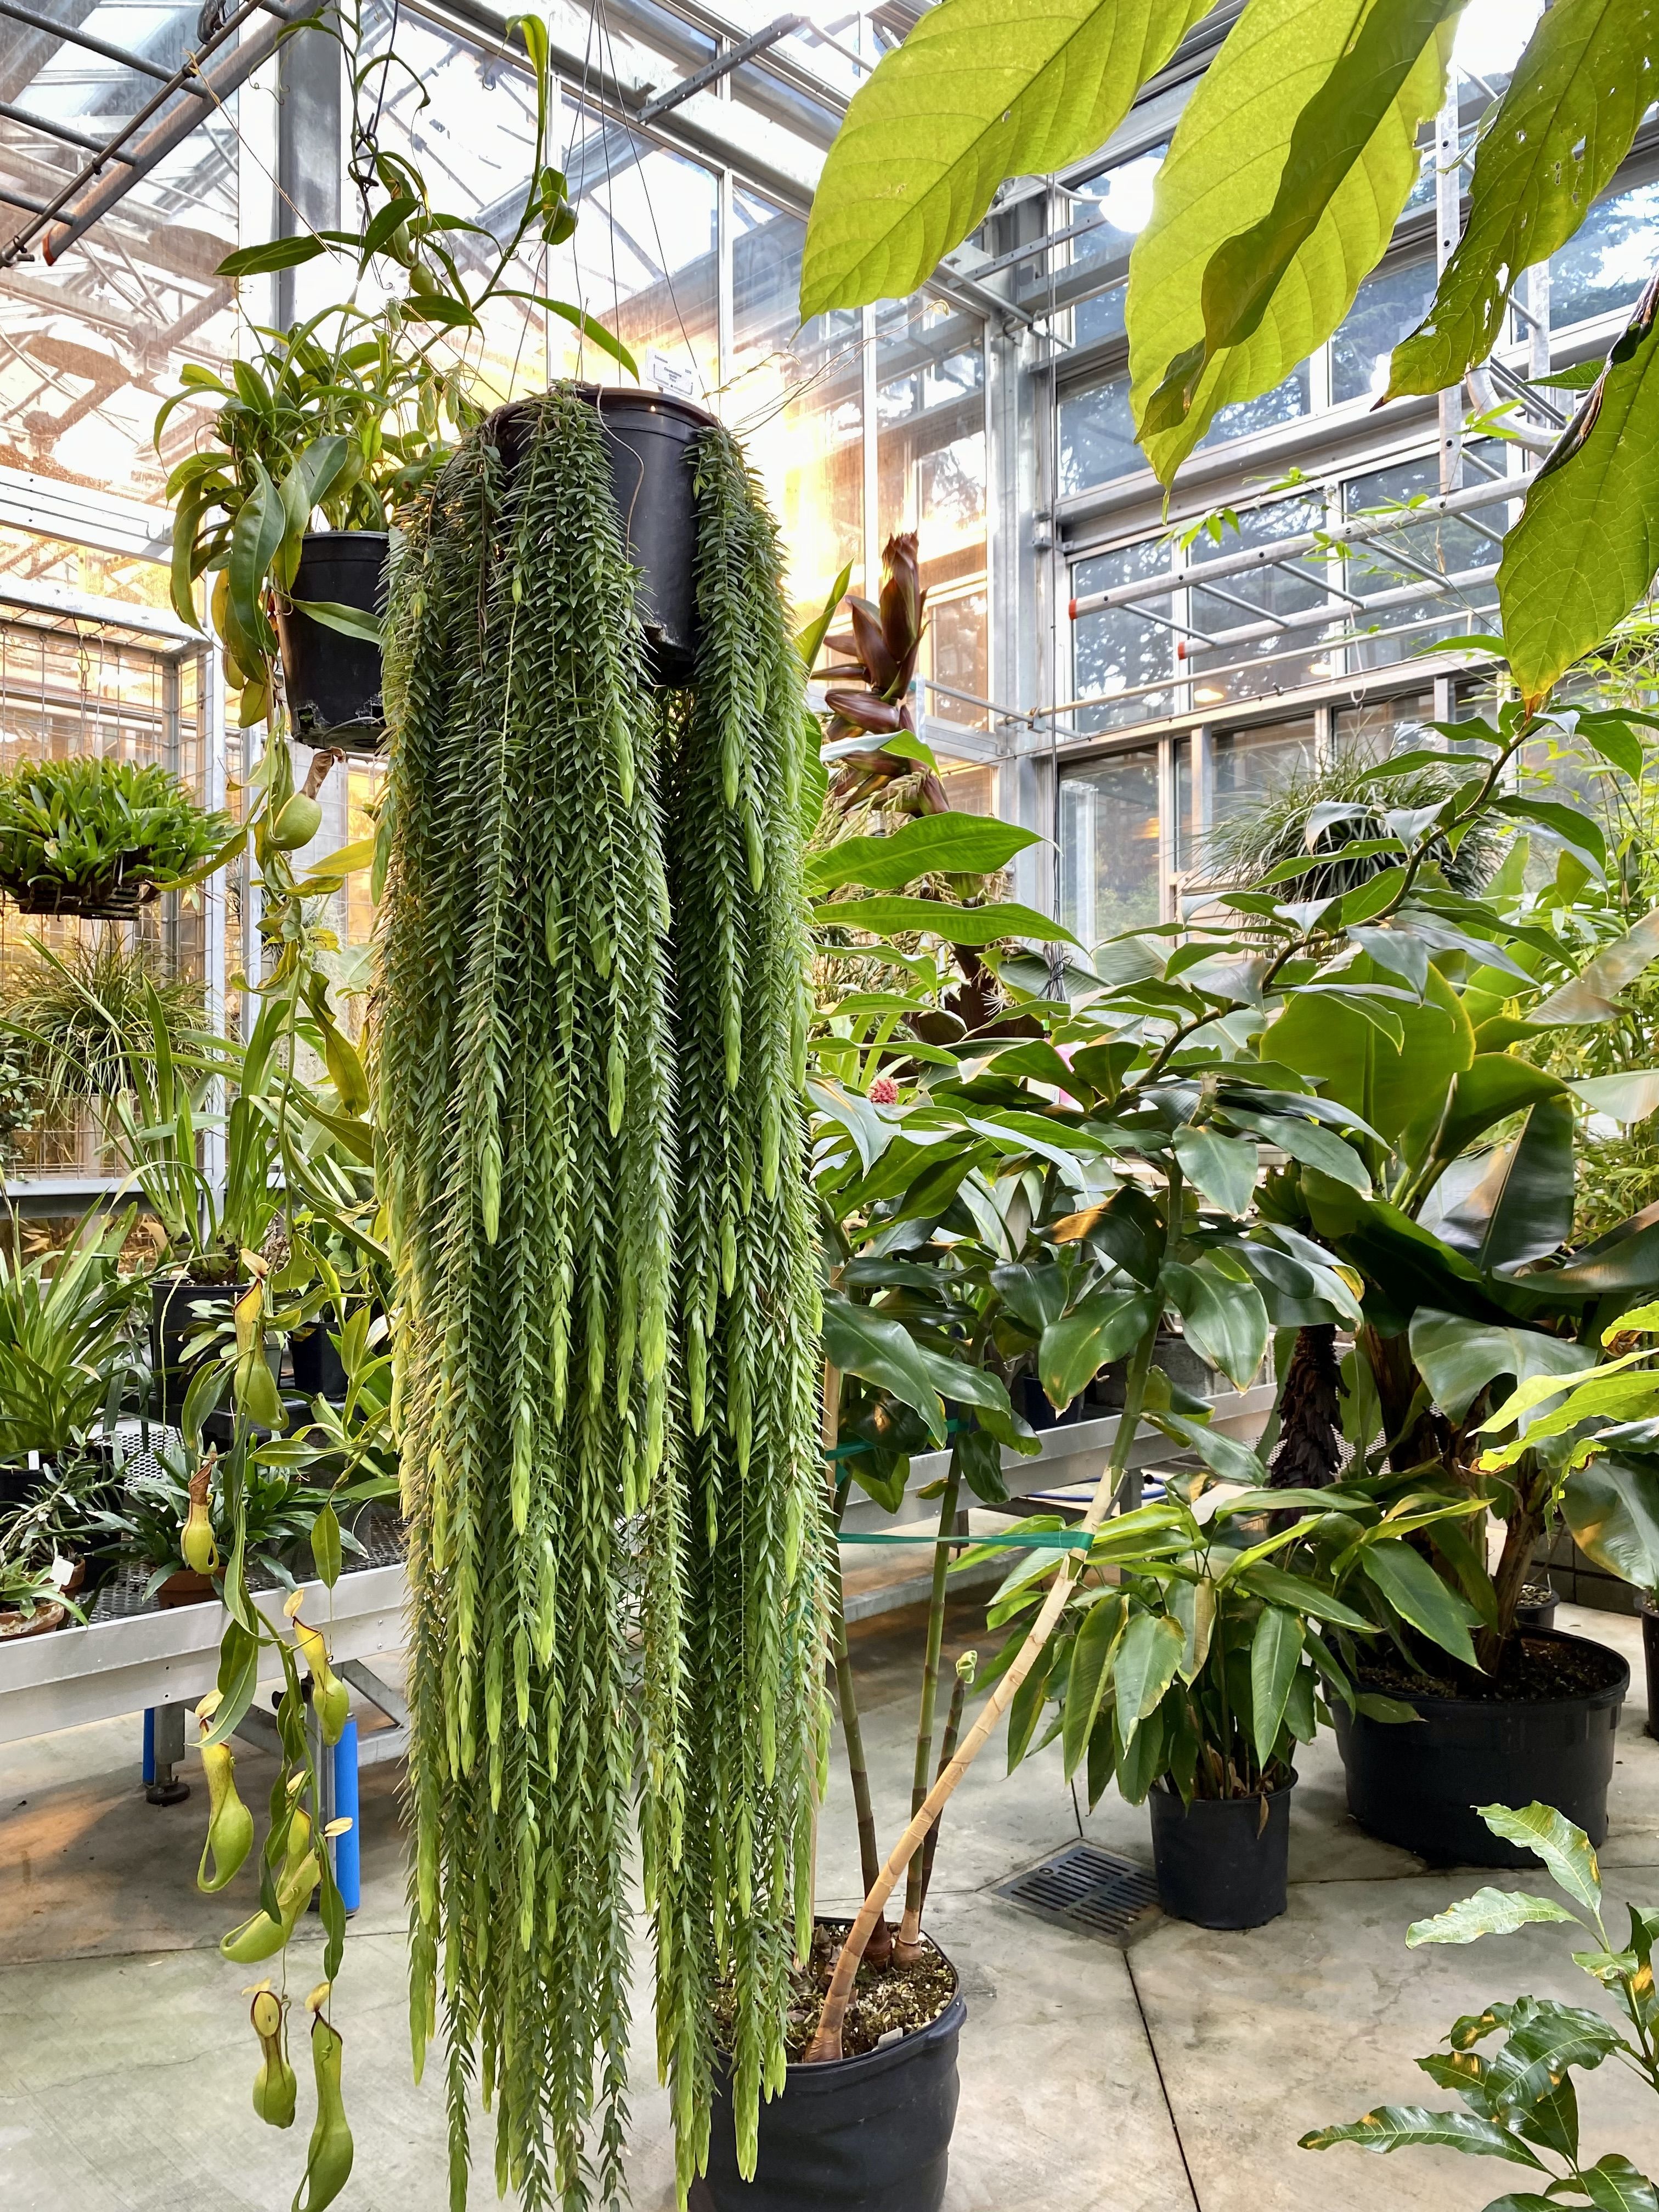 A hanging plant shown next to other plants in a greenhouse.